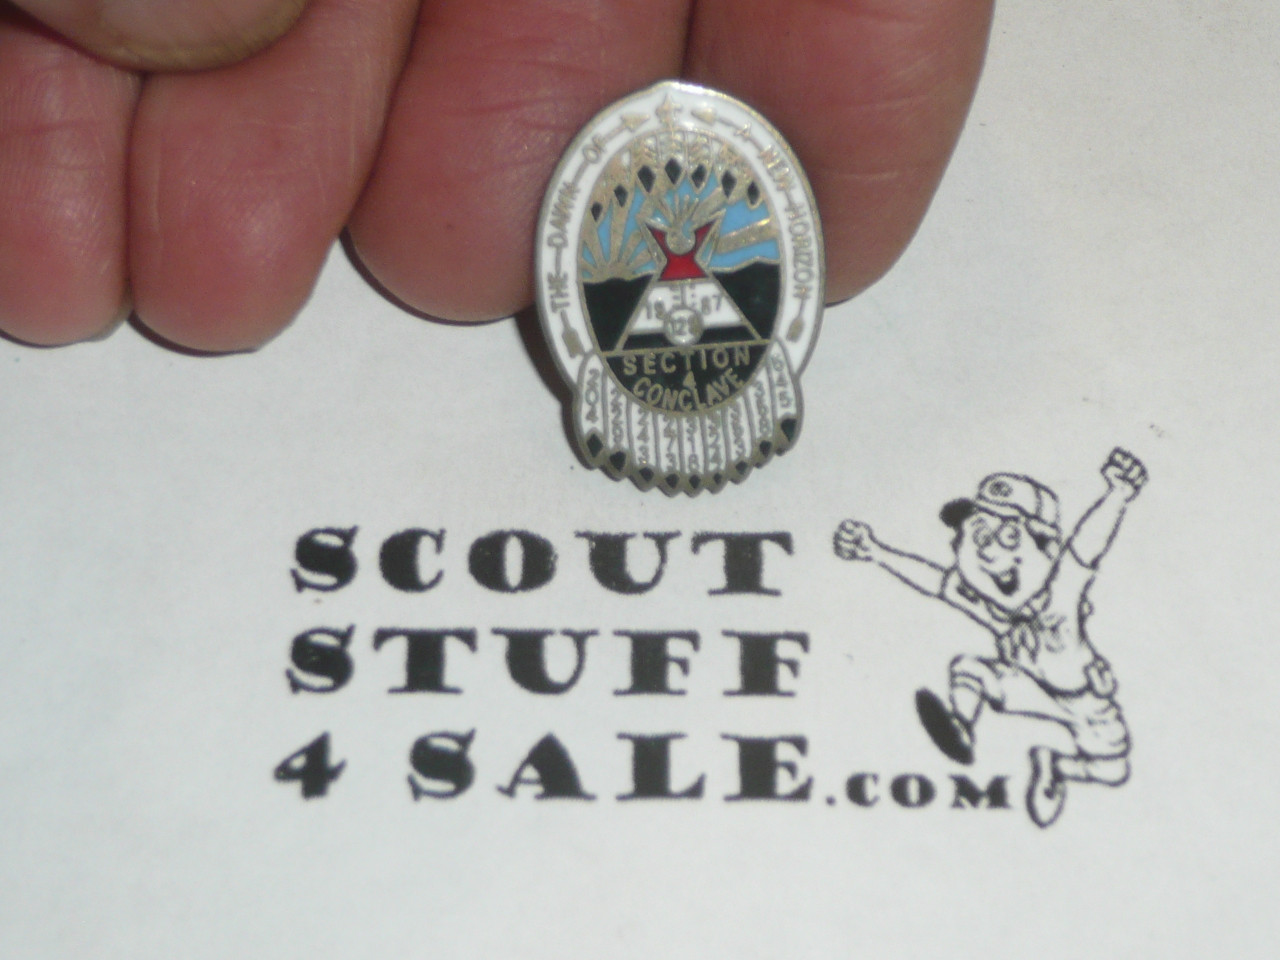 1987 O.A. Section se-4 Conclave Pin - Scout